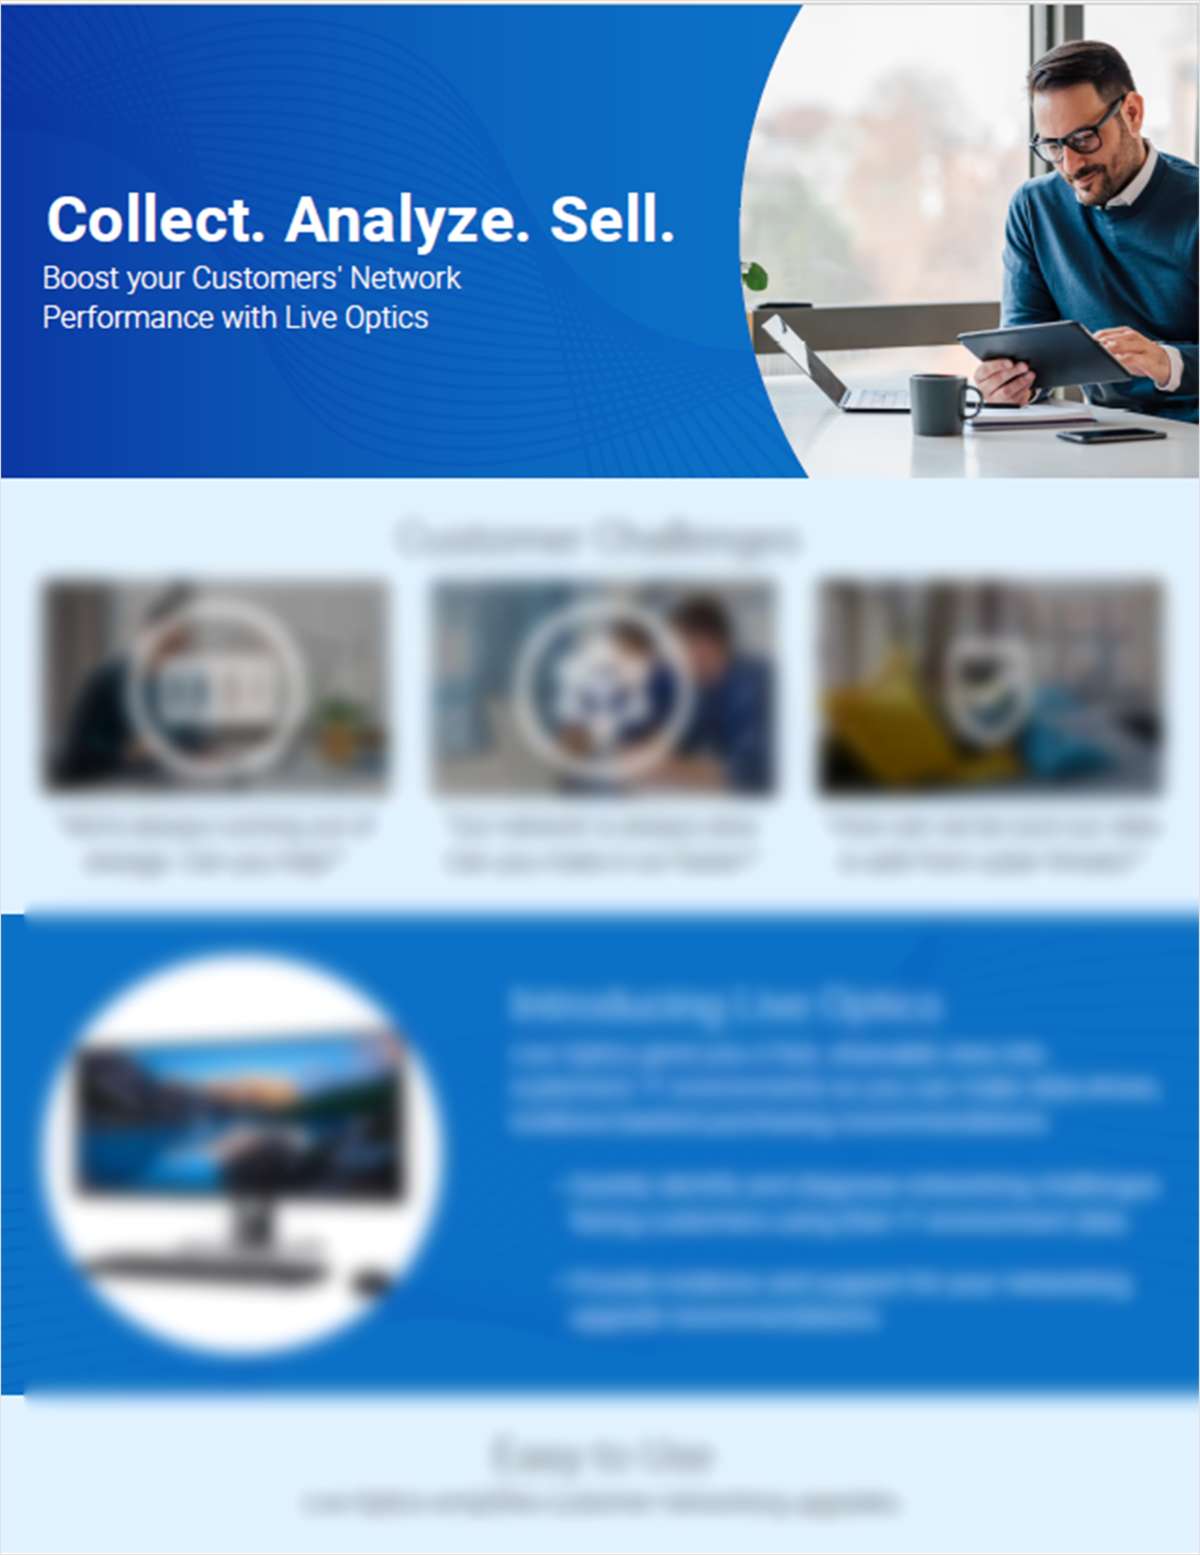 Collect. Analyze. Sell.